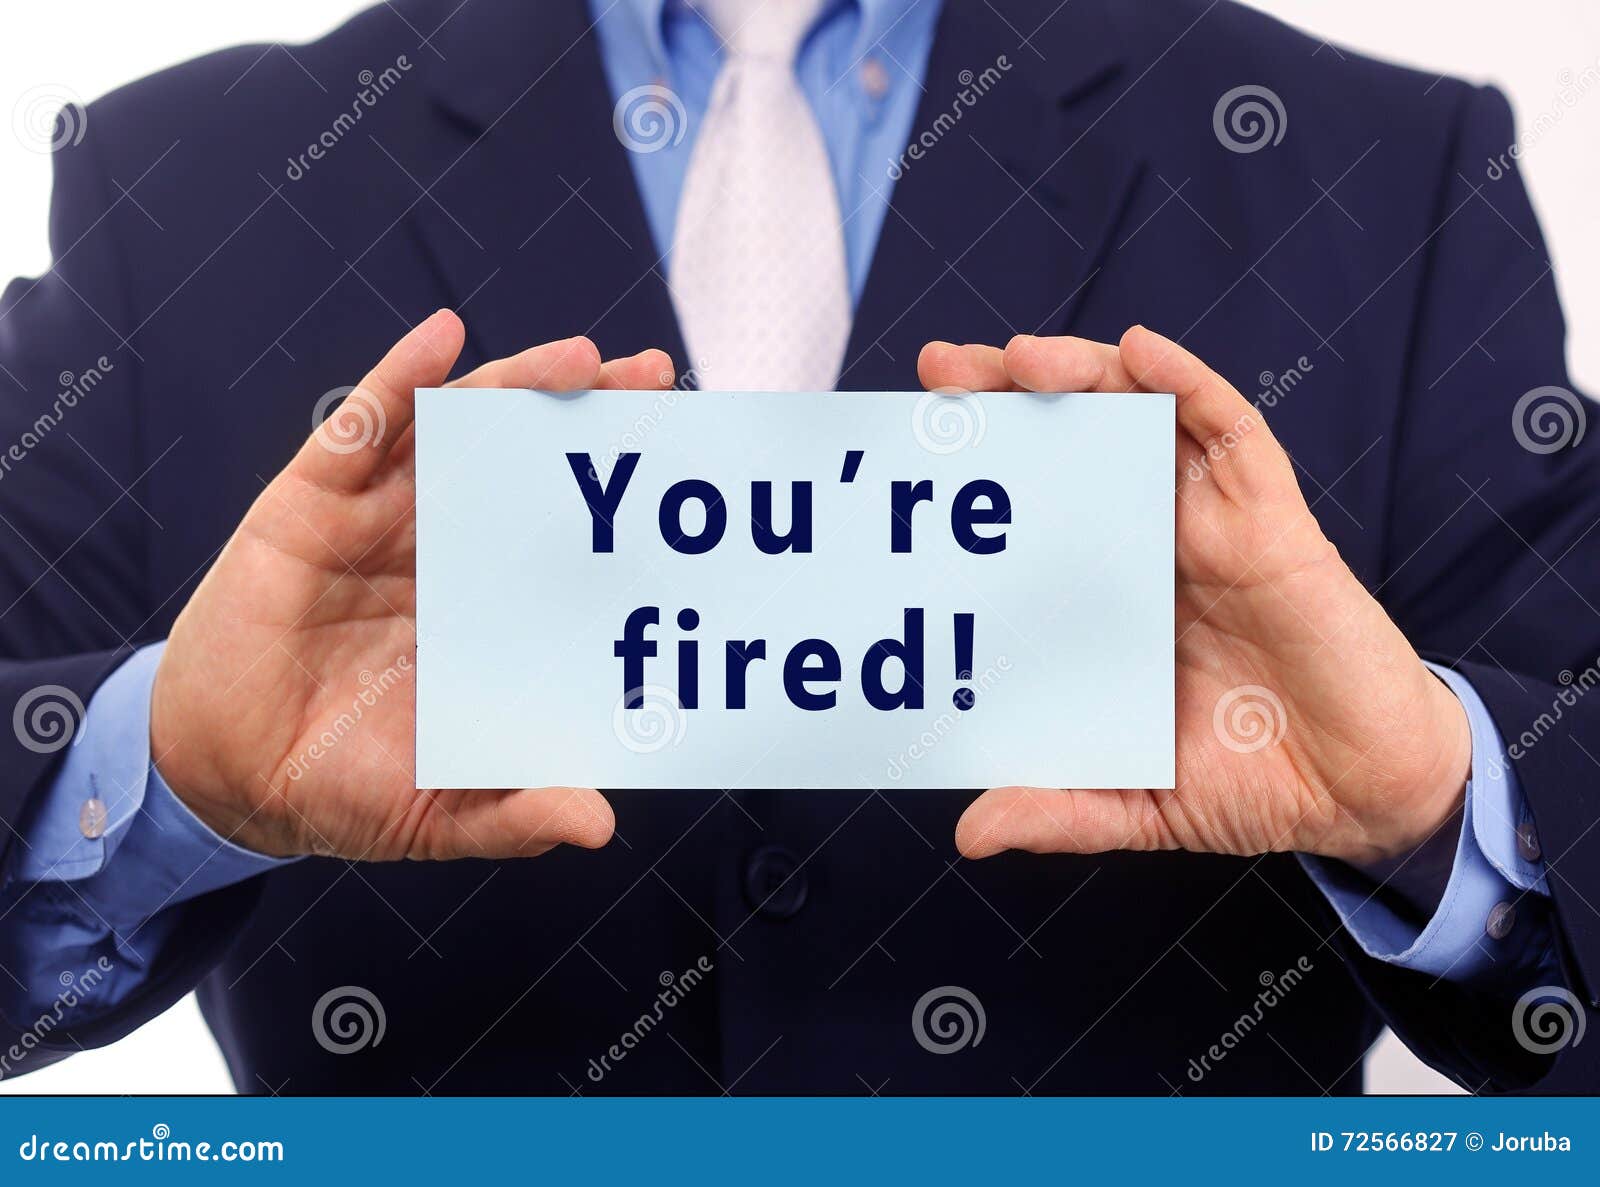 you're fired!